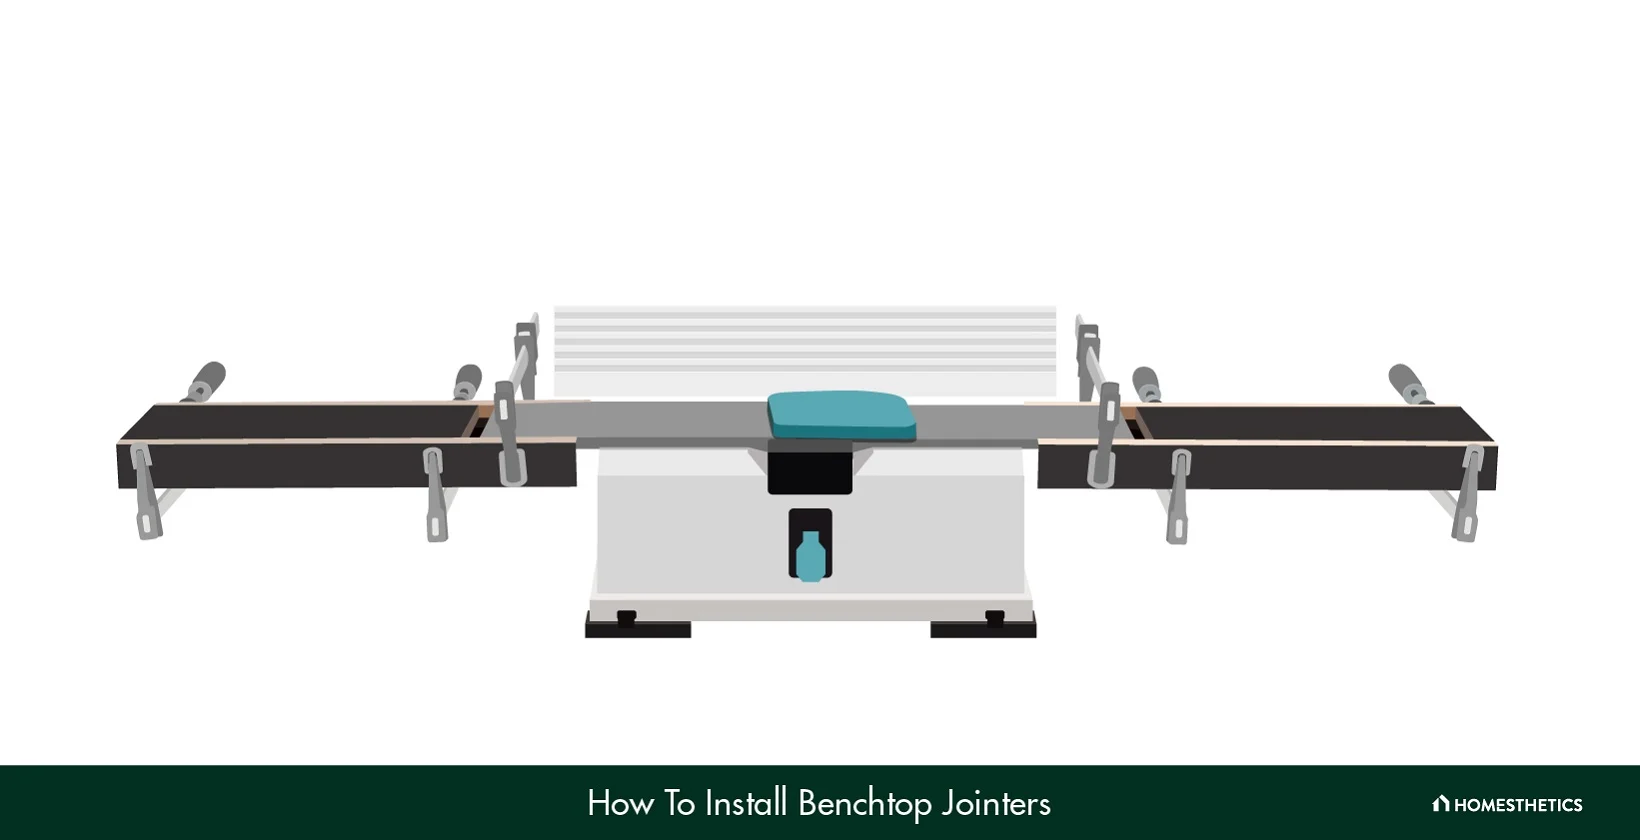 How to Install Benchtop Jointers